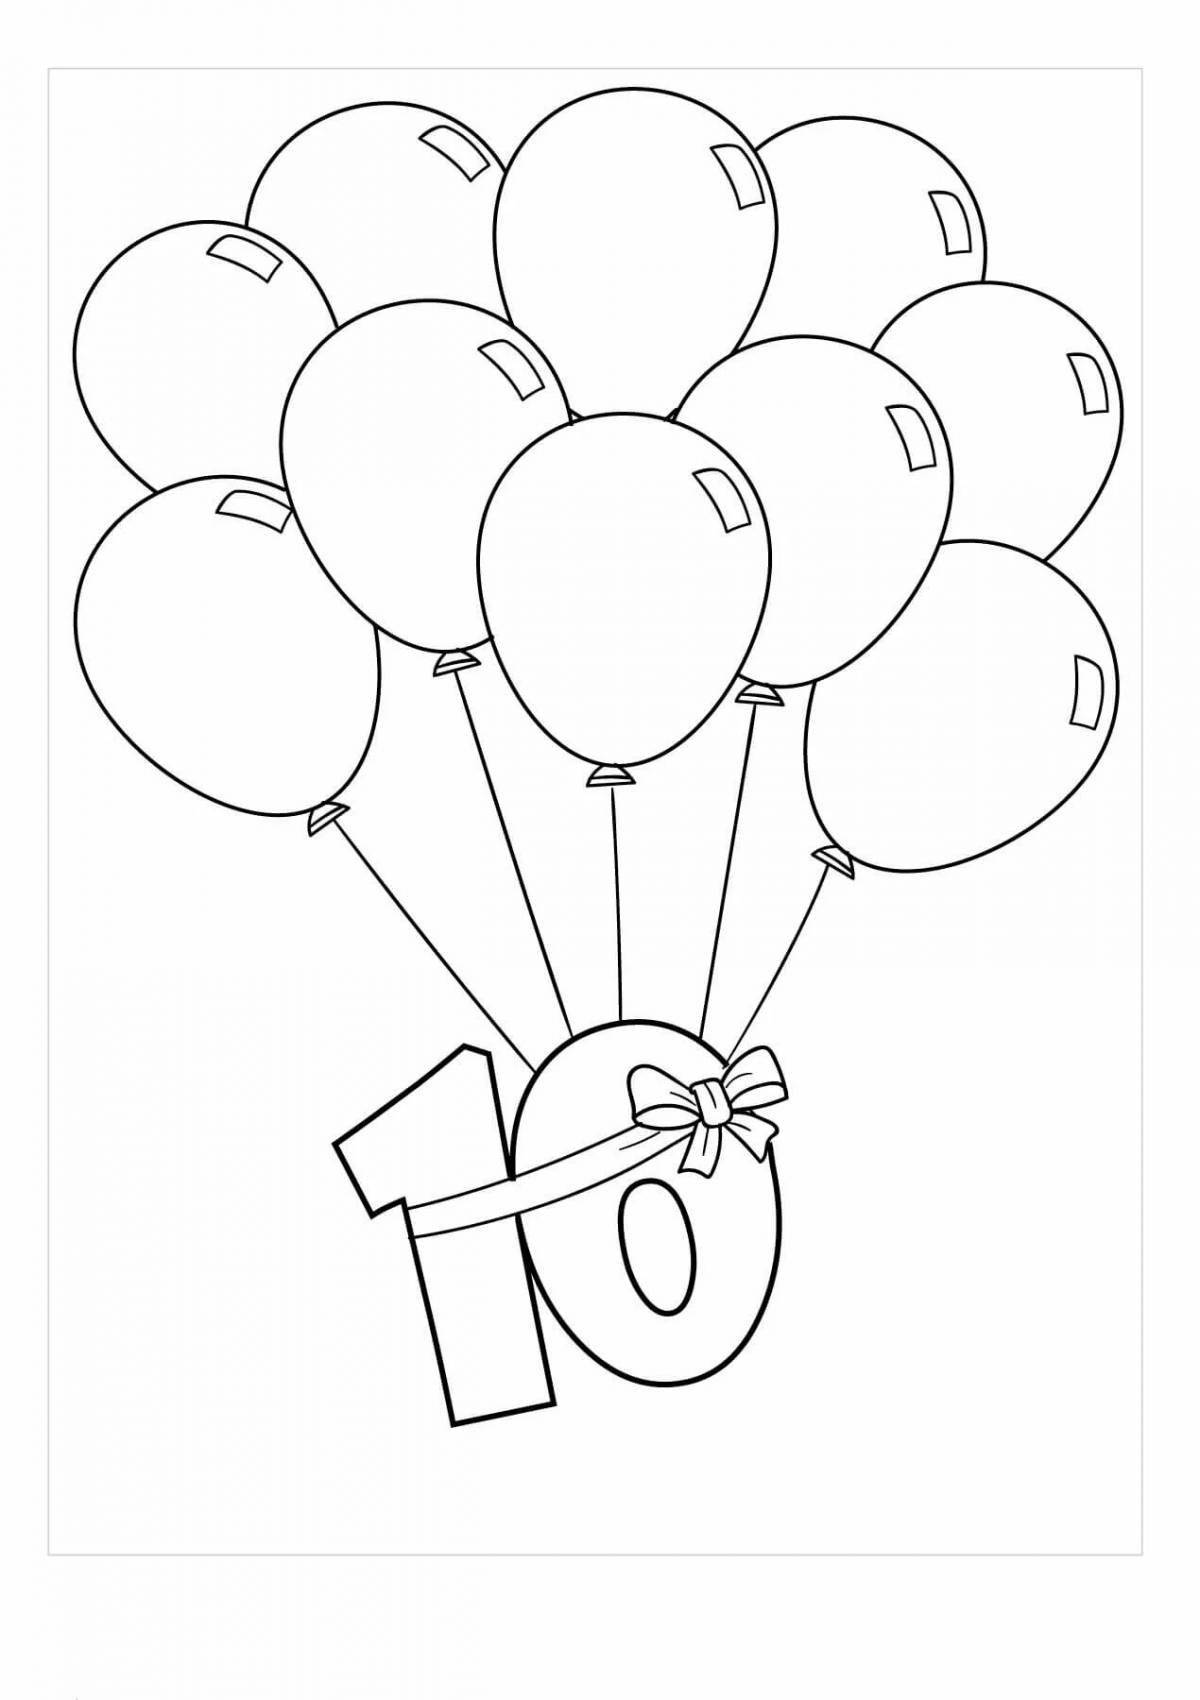 Awesome coloring pages with balls for preschoolers 2-3 years old